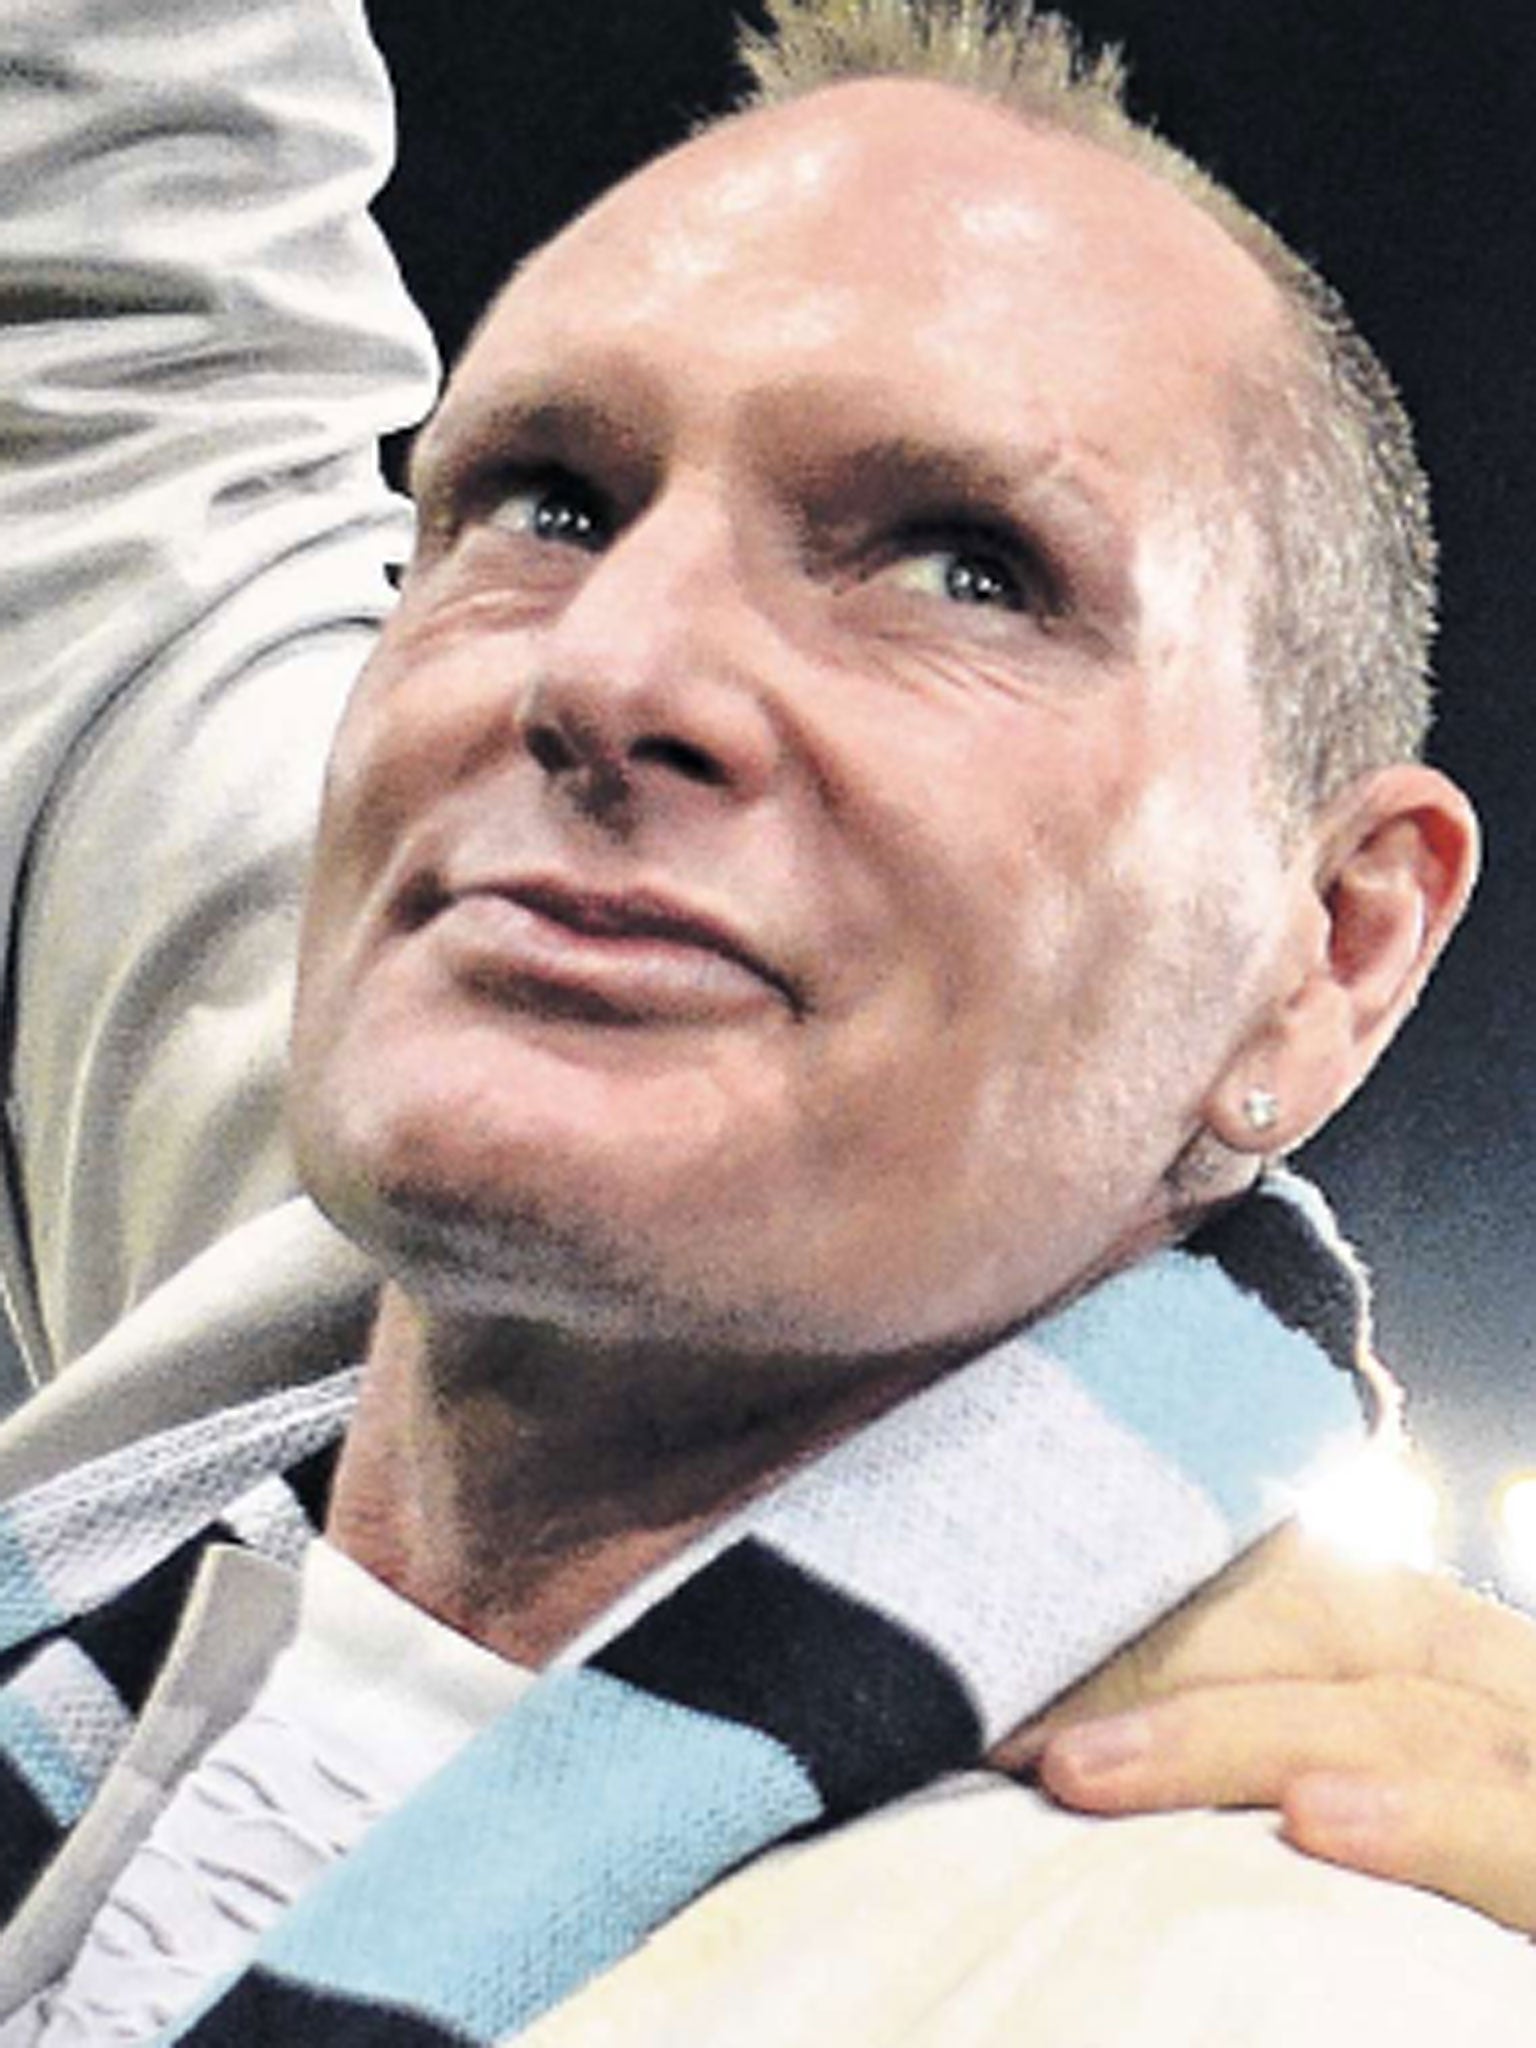 Concerns are growing for former footballer Paul Gascoigne after he appeared unwell and shaking during a charity appearance